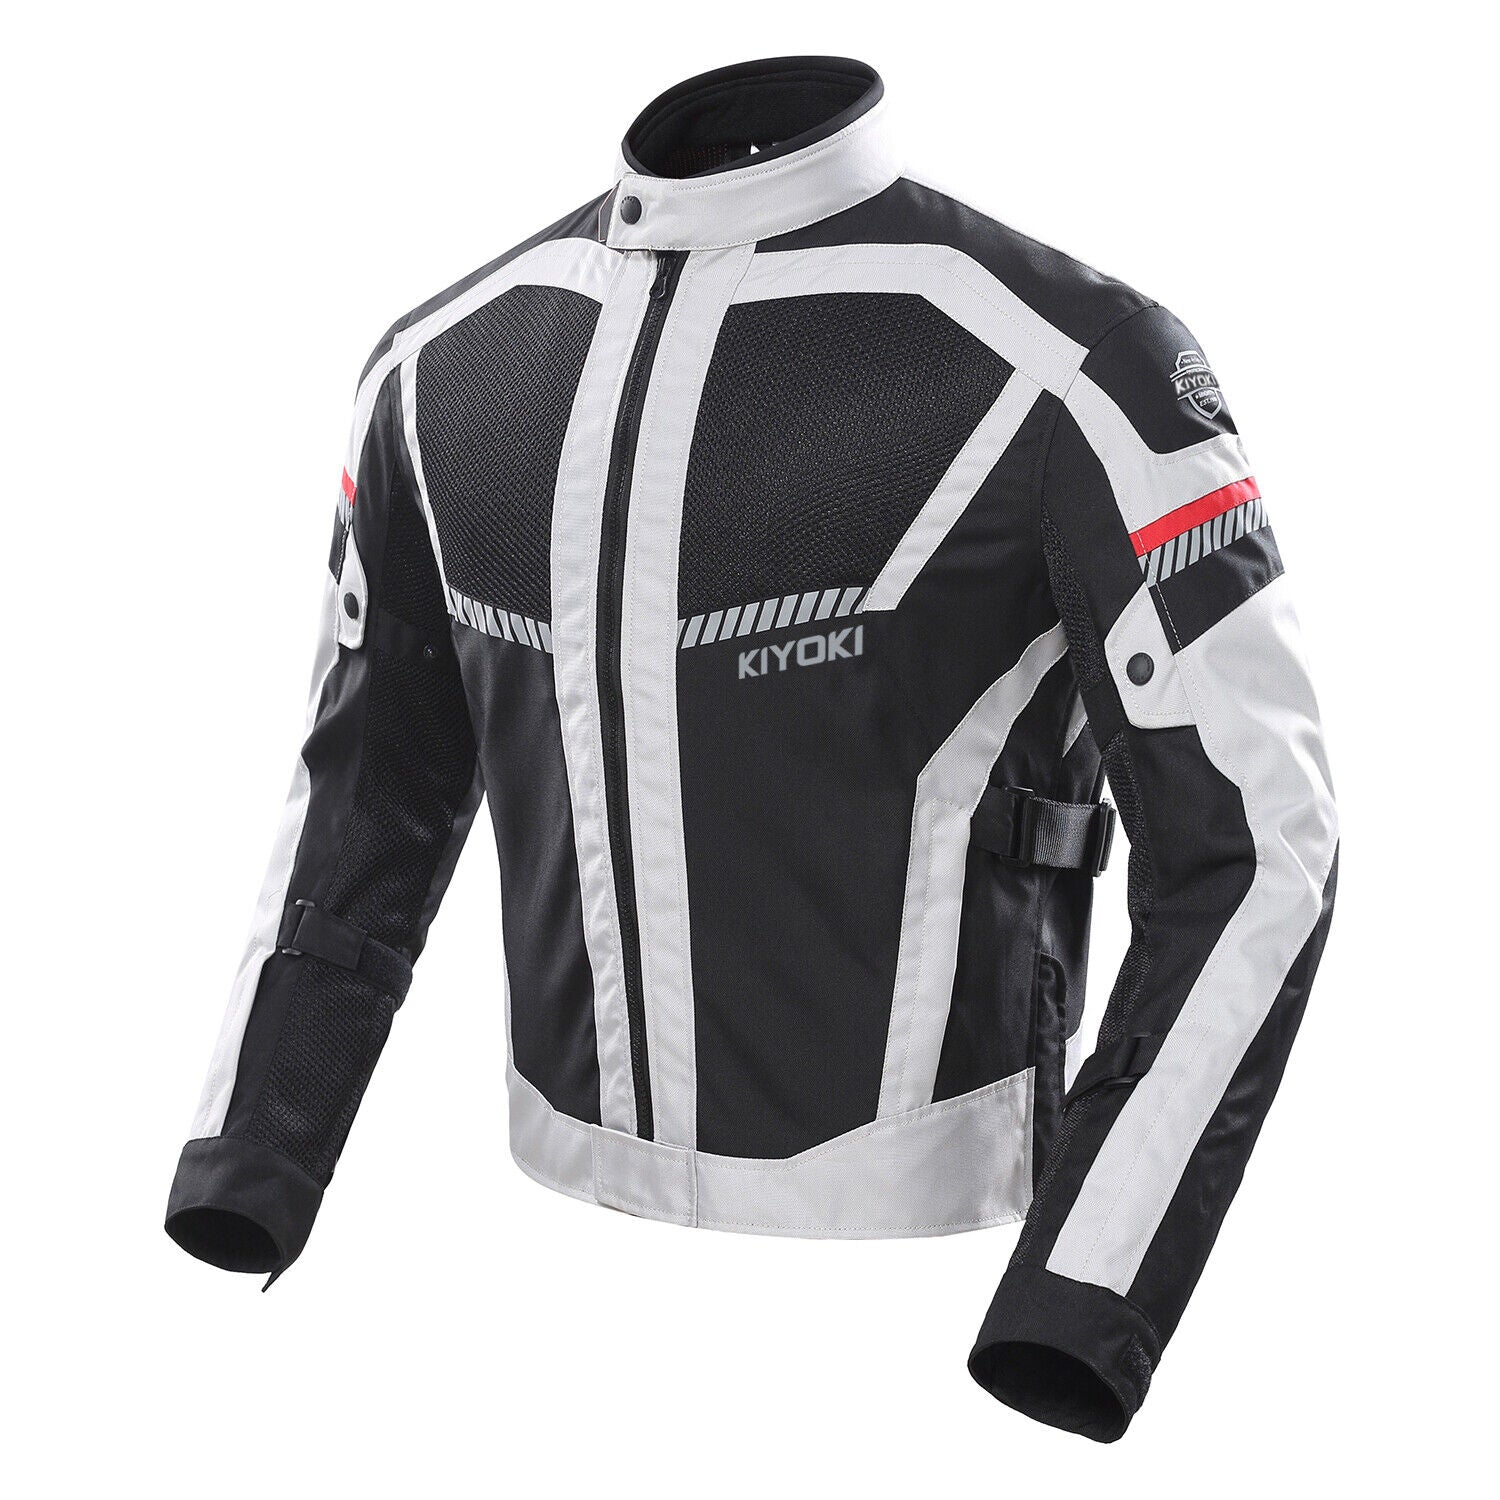 Viking Cycle Stealth Motorcycle Jacket Review (Adaptable Riding Gear)